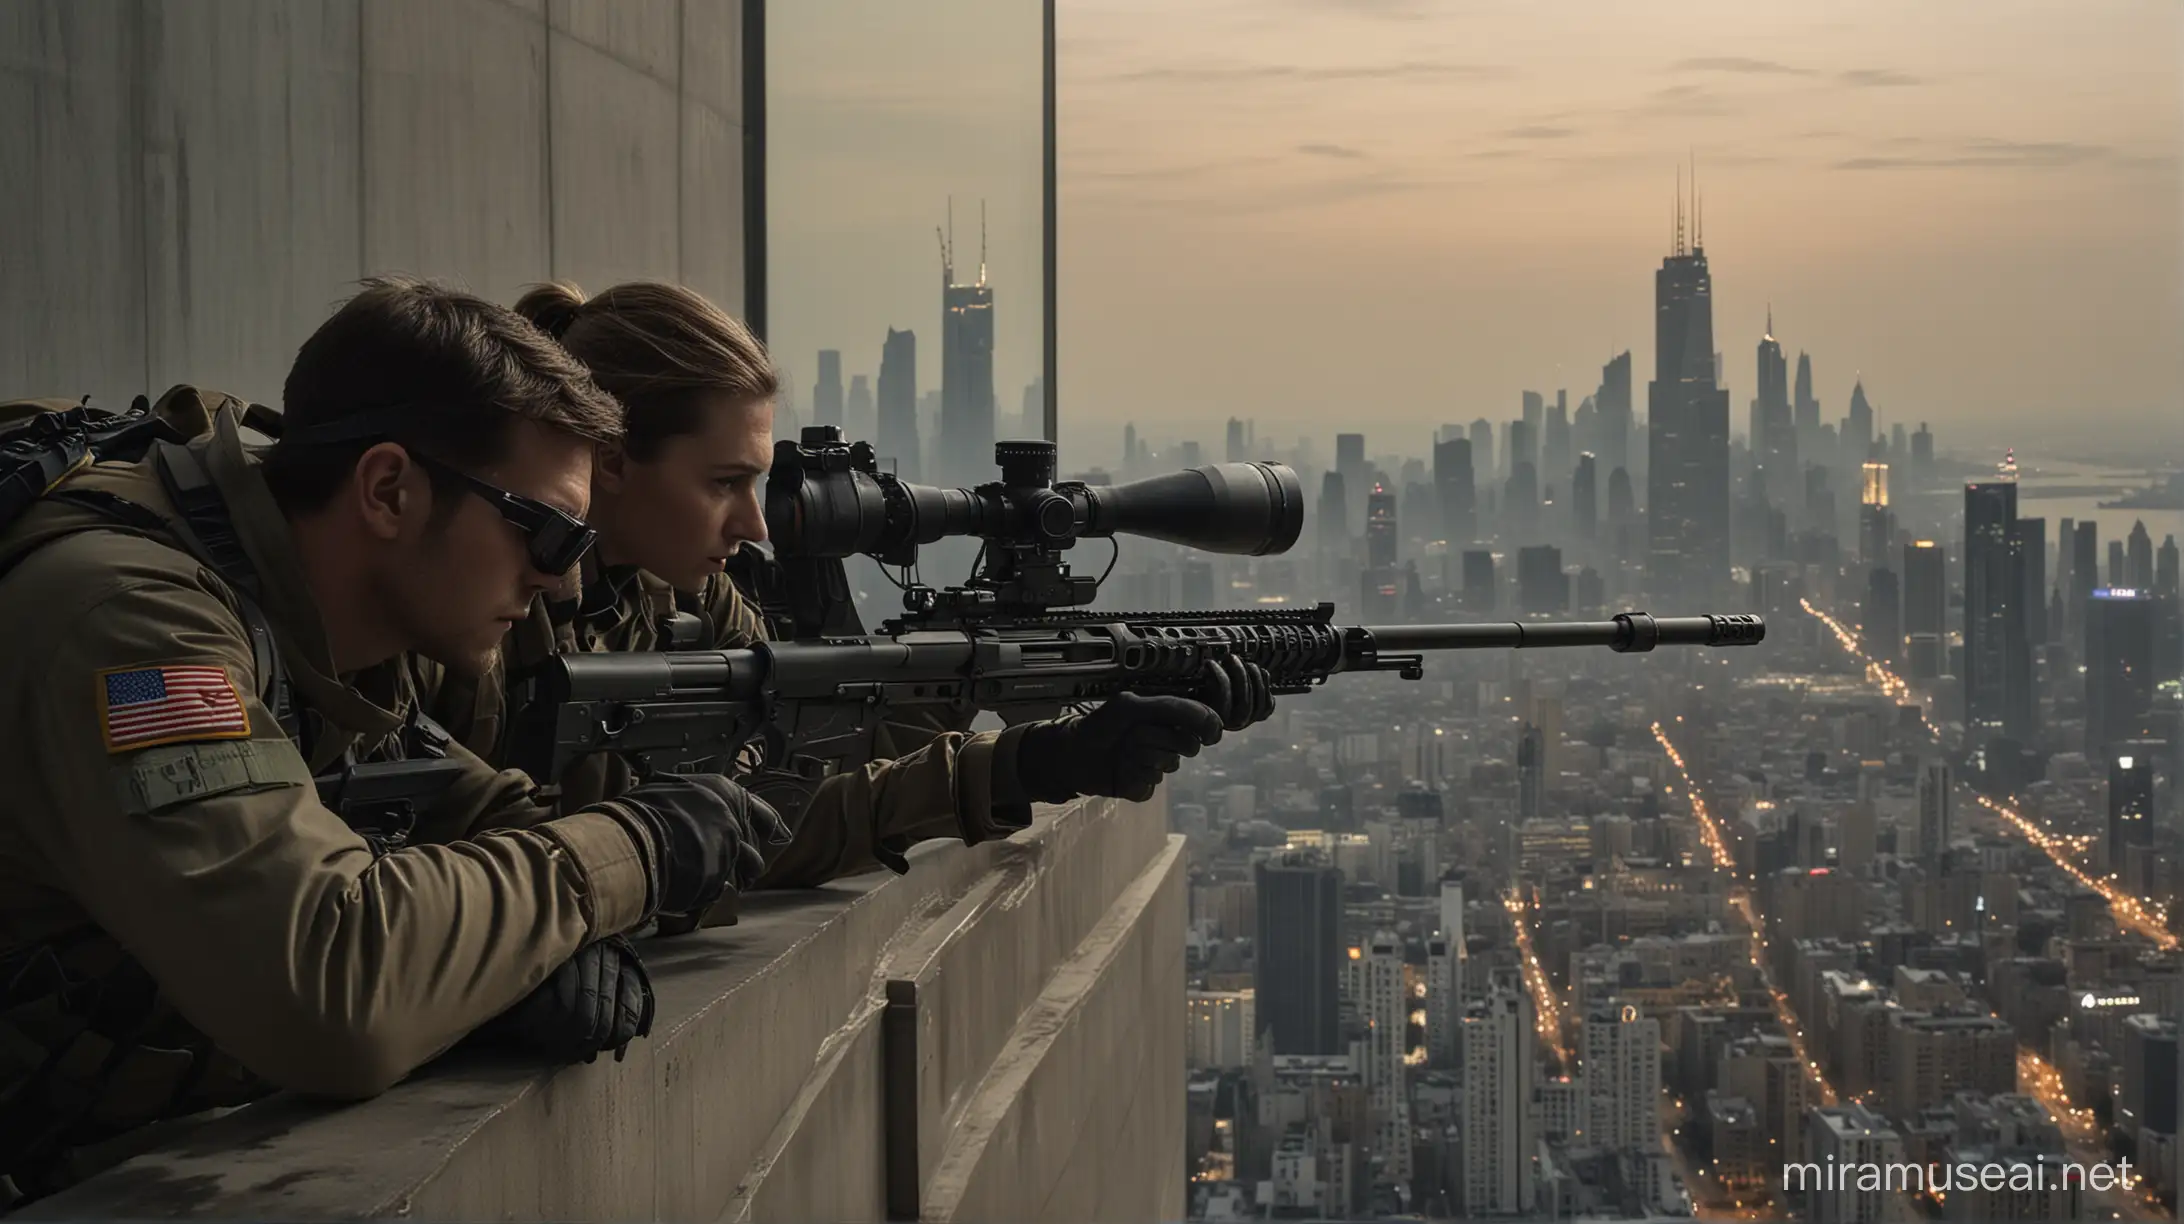 
Sure! Here's a description:

The image depicts a tense urban scene atop a towering skyscraper. In the foreground, a skilled sniper and their spotter are positioned, their gear meticulously arranged as they peer through high-powered scopes. The sniper, cloaked in camouflage, adjusts their position while the spotter maintains a vigilant gaze, ready to relay critical information.

In the background, three lookout team members stand at various vantage points along the building's edge, their eyes scanning the city below for any signs of trouble. Despite the bustling cityscape below, their focus remains unwavering, a testament to their dedication to the mission at hand.

The image centers on a dimly lit room nestled within the upper levels of a towering skyscraper. Two figures, a sniper and their spotter, occupy the foreground, their tense expressions illuminated by the glow of computer screens and tactical equipment. The sniper, positioned with precision, adjusts their rifle while the spotter maintains a vigilant watch, their eyes fixed on a distant target.

In the background, three additional team members stand at attention, their silhouettes framed against the panoramic view of the city skyline beyond floor-to-ceiling windows. Despite the luxurious surroundings of the room, the atmosphere is charged with anticipation, the team's focus unwavering as they await the signal to act.

Beyond the glass, the facade of a grand hotel shimmers in the evening light, its opulent exterior a stark contrast to the covert operations unfolding within the confines of the skyscraper. The juxtaposition of the team's intense concentration against the backdrop of urban elegance hints at the high-stakes nature of their mission, poised on the razor's edge between secrecy and visibility.